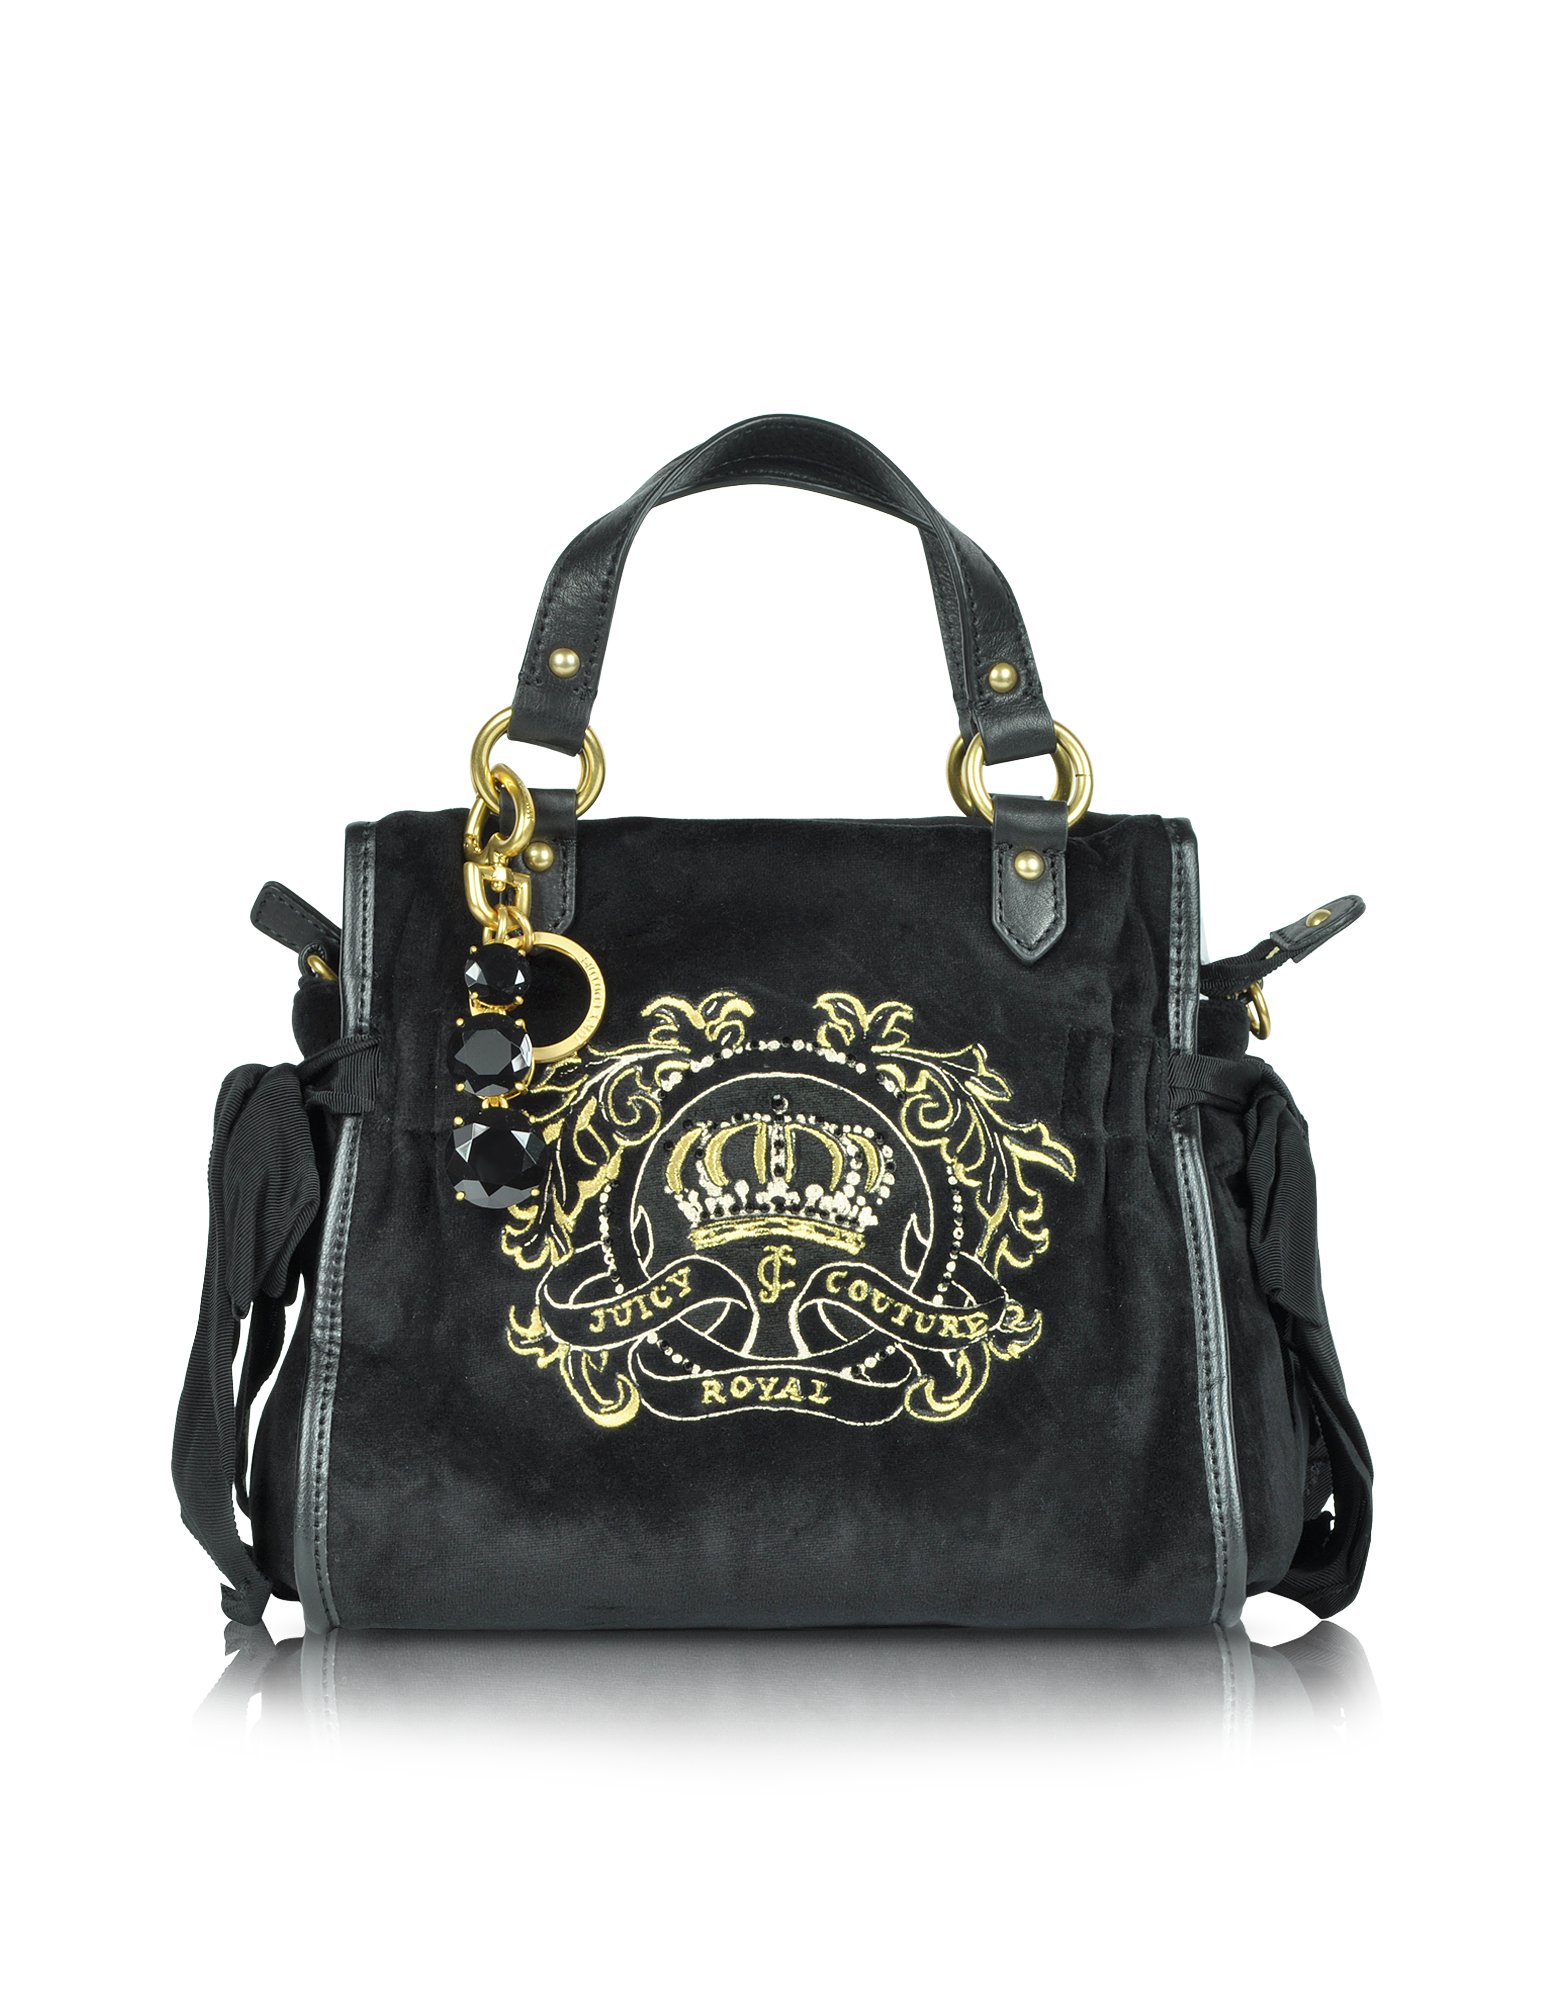 Juicy Couture Small Crown Ms Daydreamer Satchel in Black | Lyst